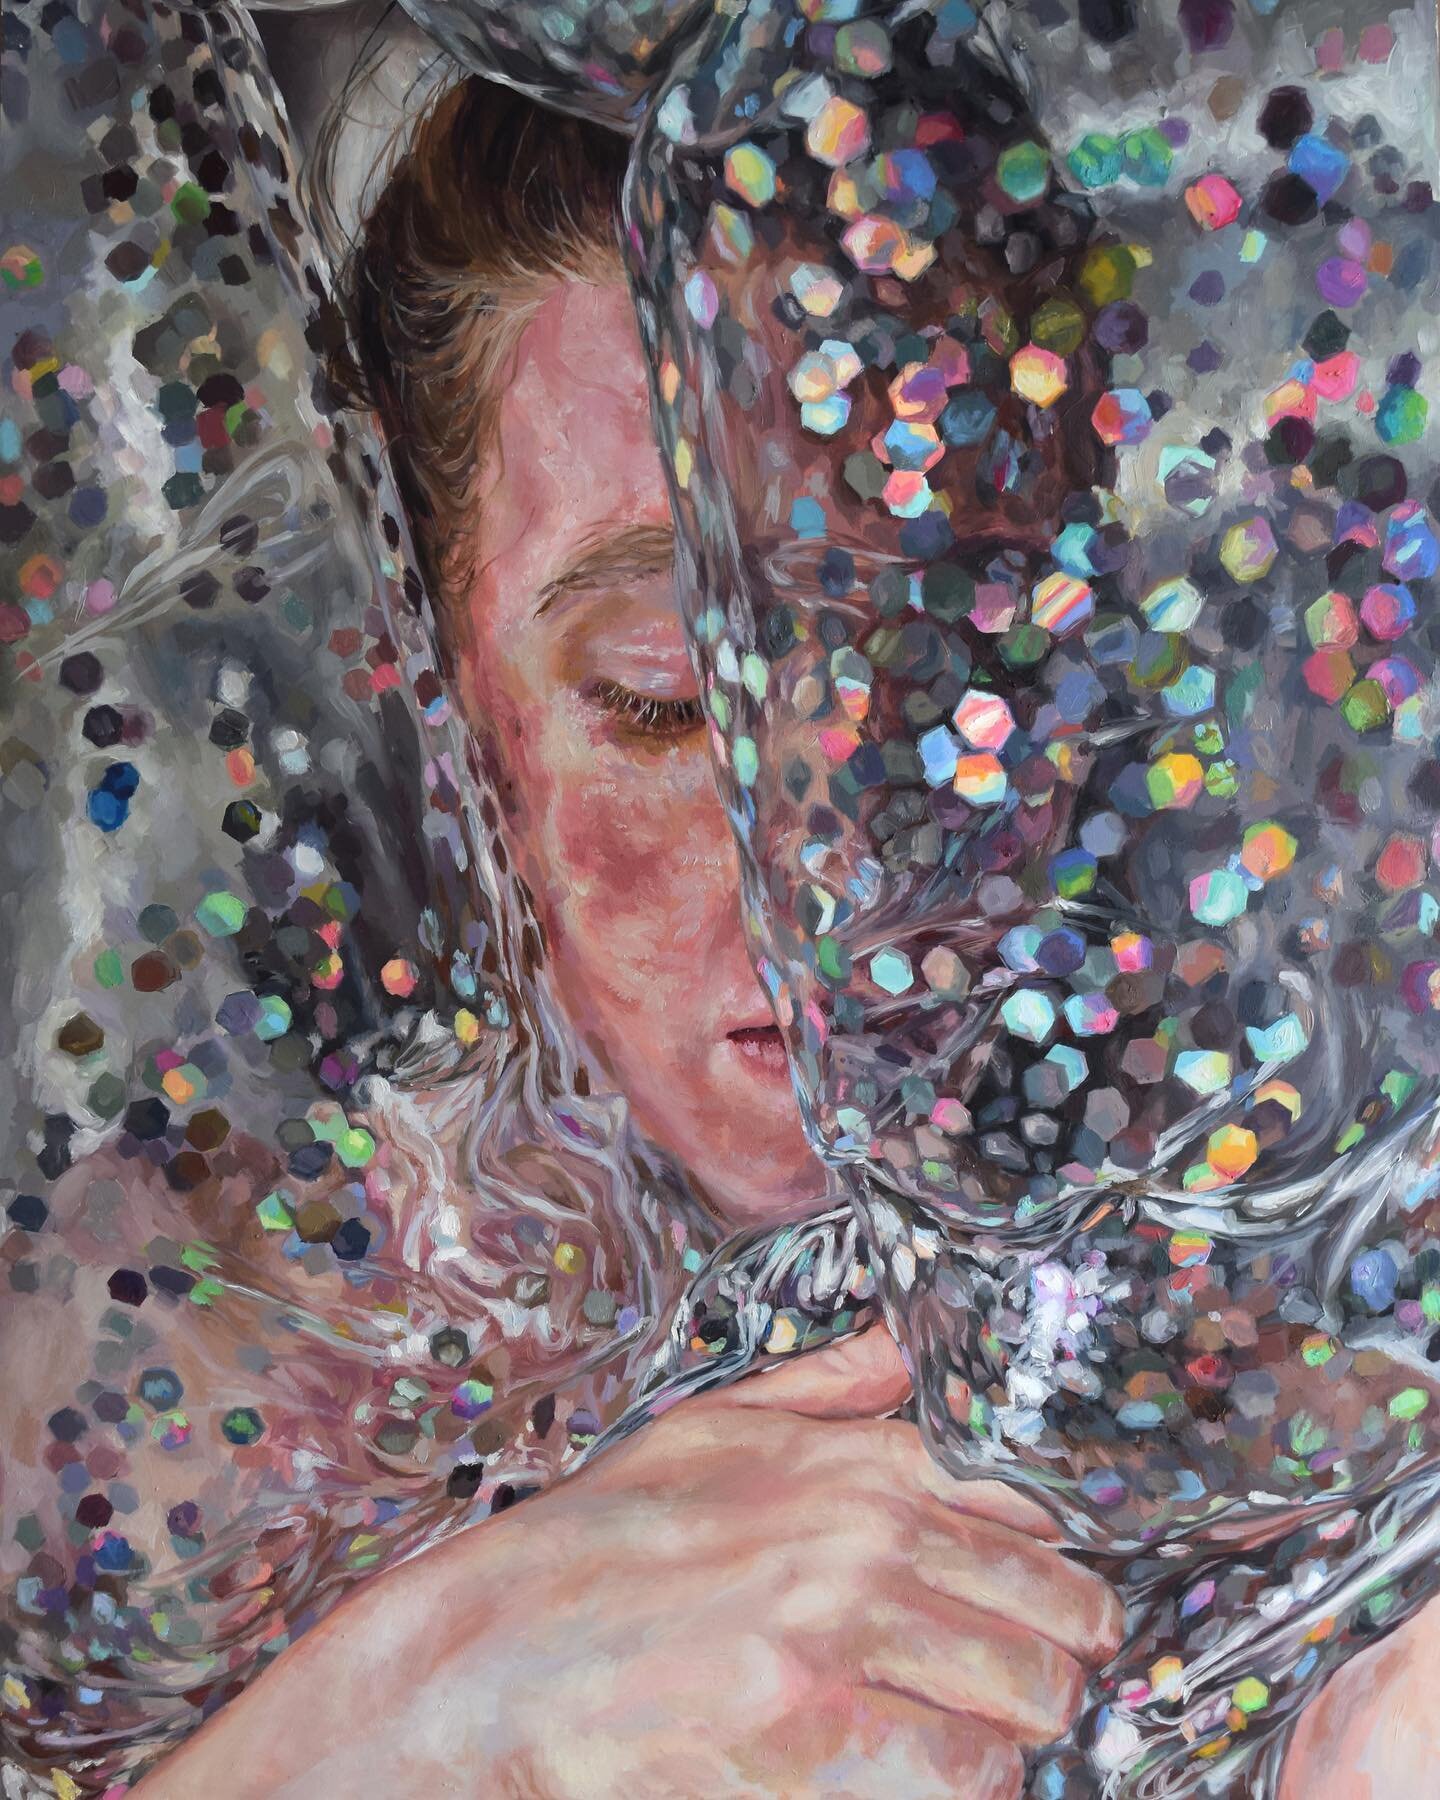 #fbf to this piece from 2019 🪩🌟

Deflate | Oil on aluminum panel | 20x26in. 

#socialanxiety #anxioushuman #glitterbomb #painting #oilpainting #contemporaryrealism #inflatable